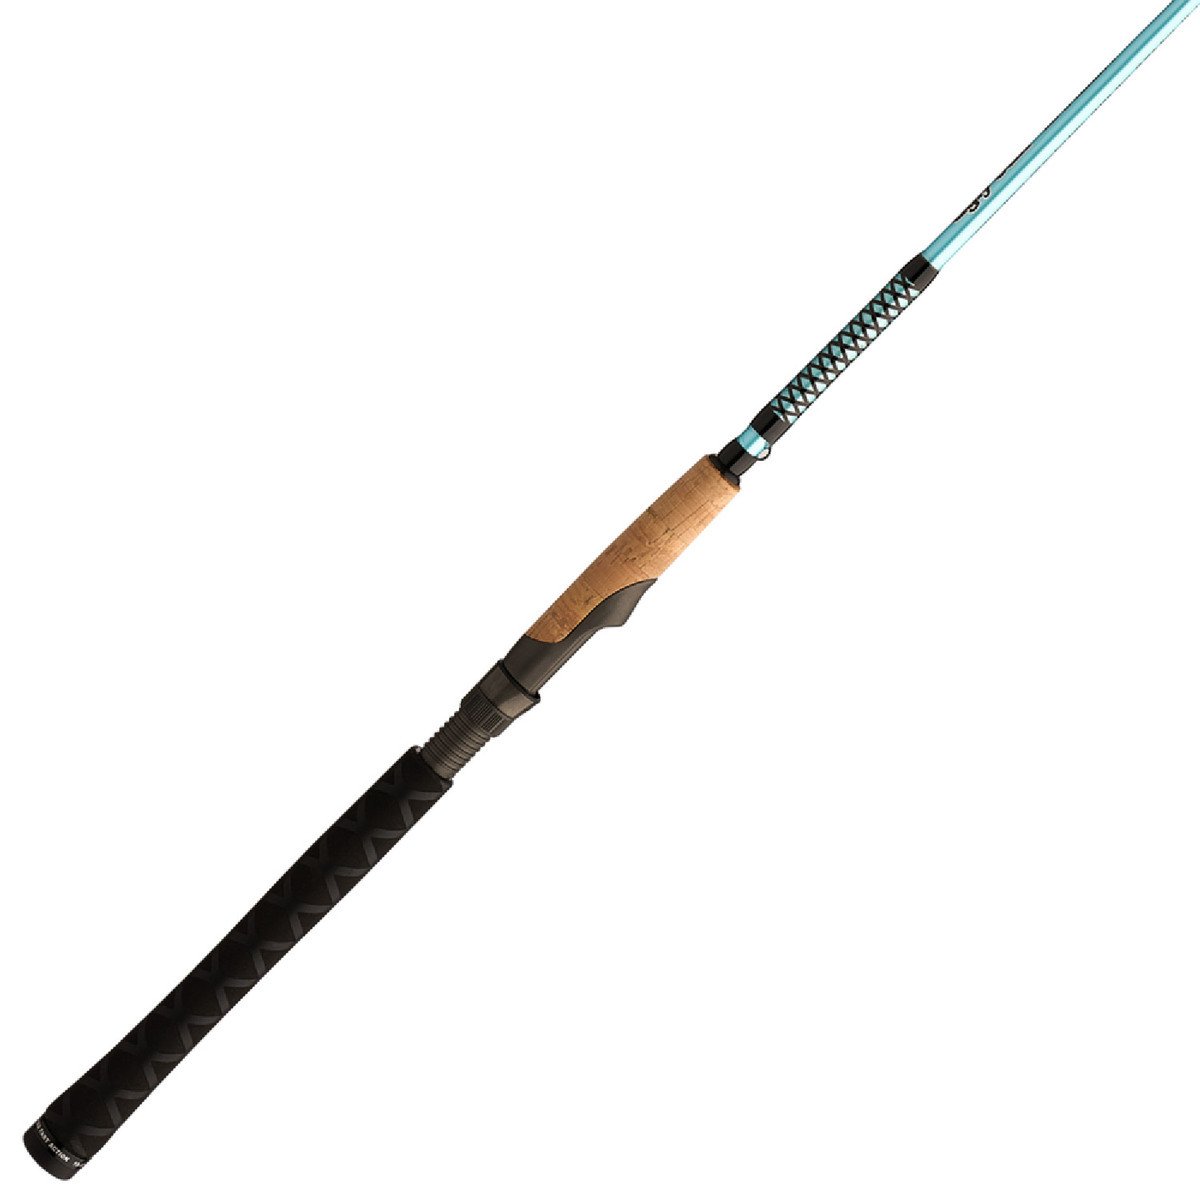 SNAGGING ROD MEAT HUNTER 12' HVY Spinning -SPOONBILL, CATF -LOWEST SHIP  COST! 